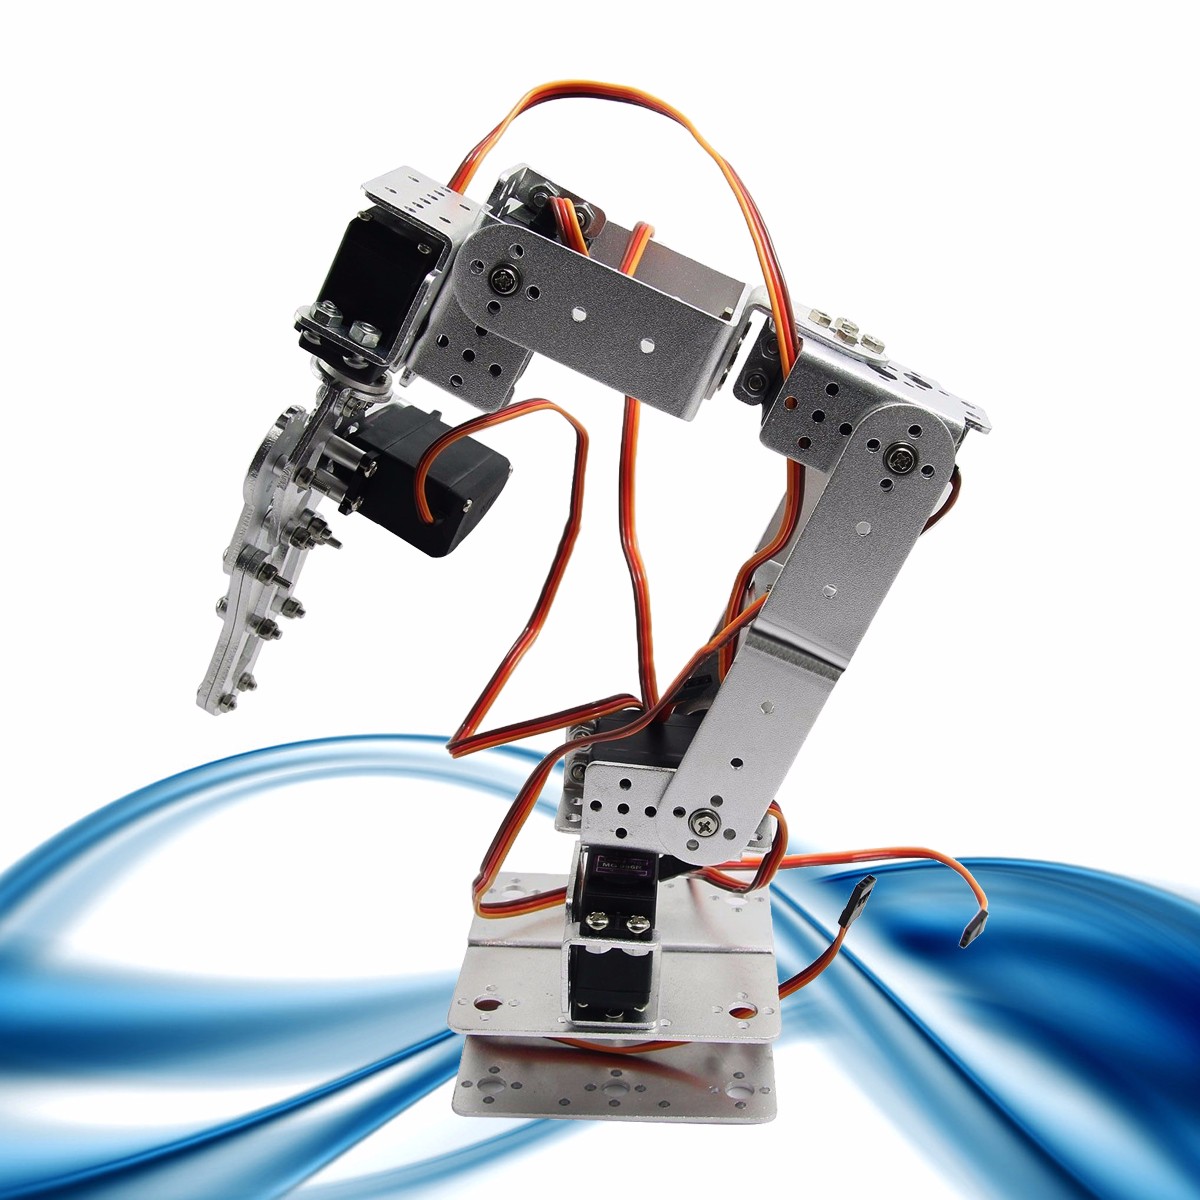 ROT2U 6DOF Aluminium Robot Arm Clamp Claw Mount Kit With Servos For Arduino-Silver